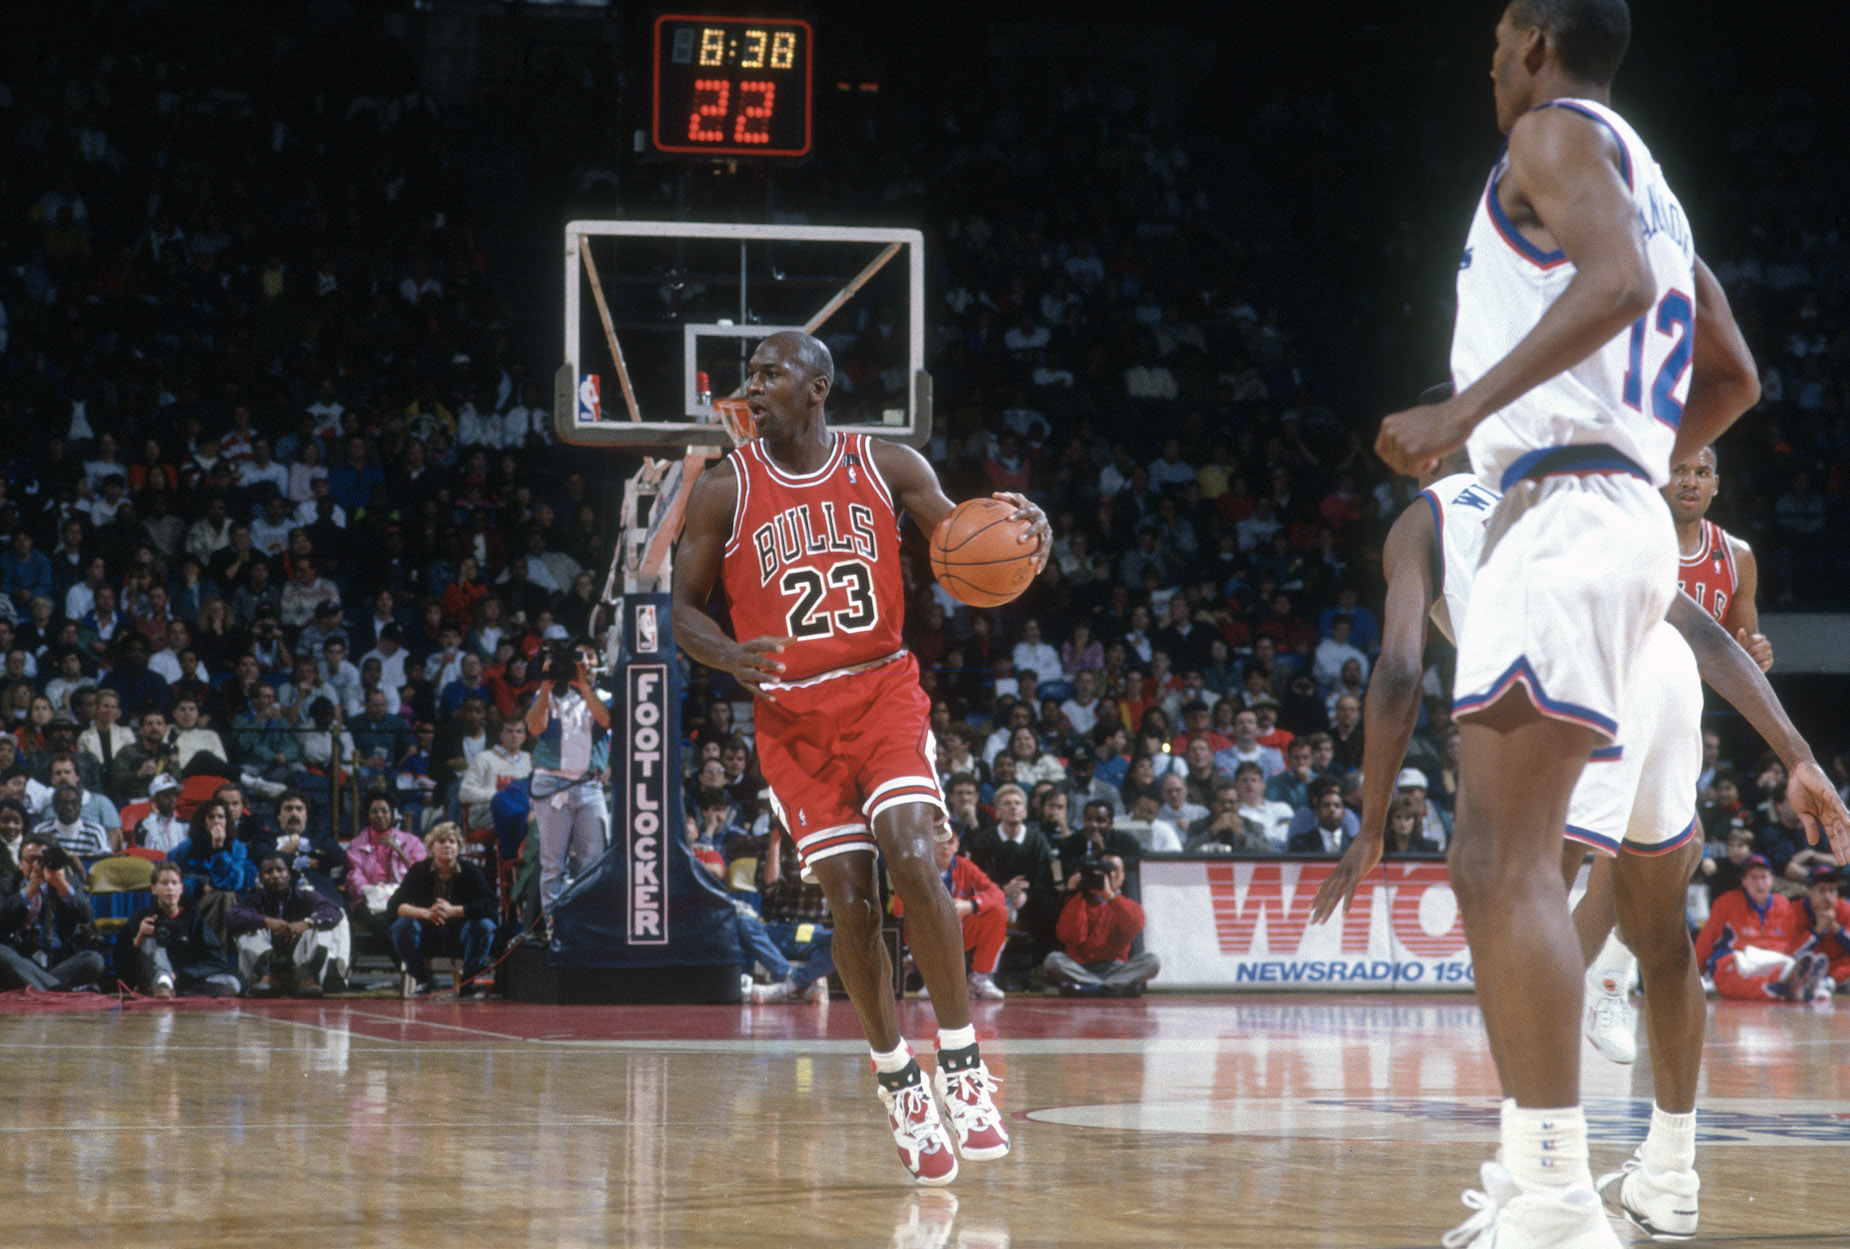 Michael Jordan dribbles down the court during a Chicago Bulls game.